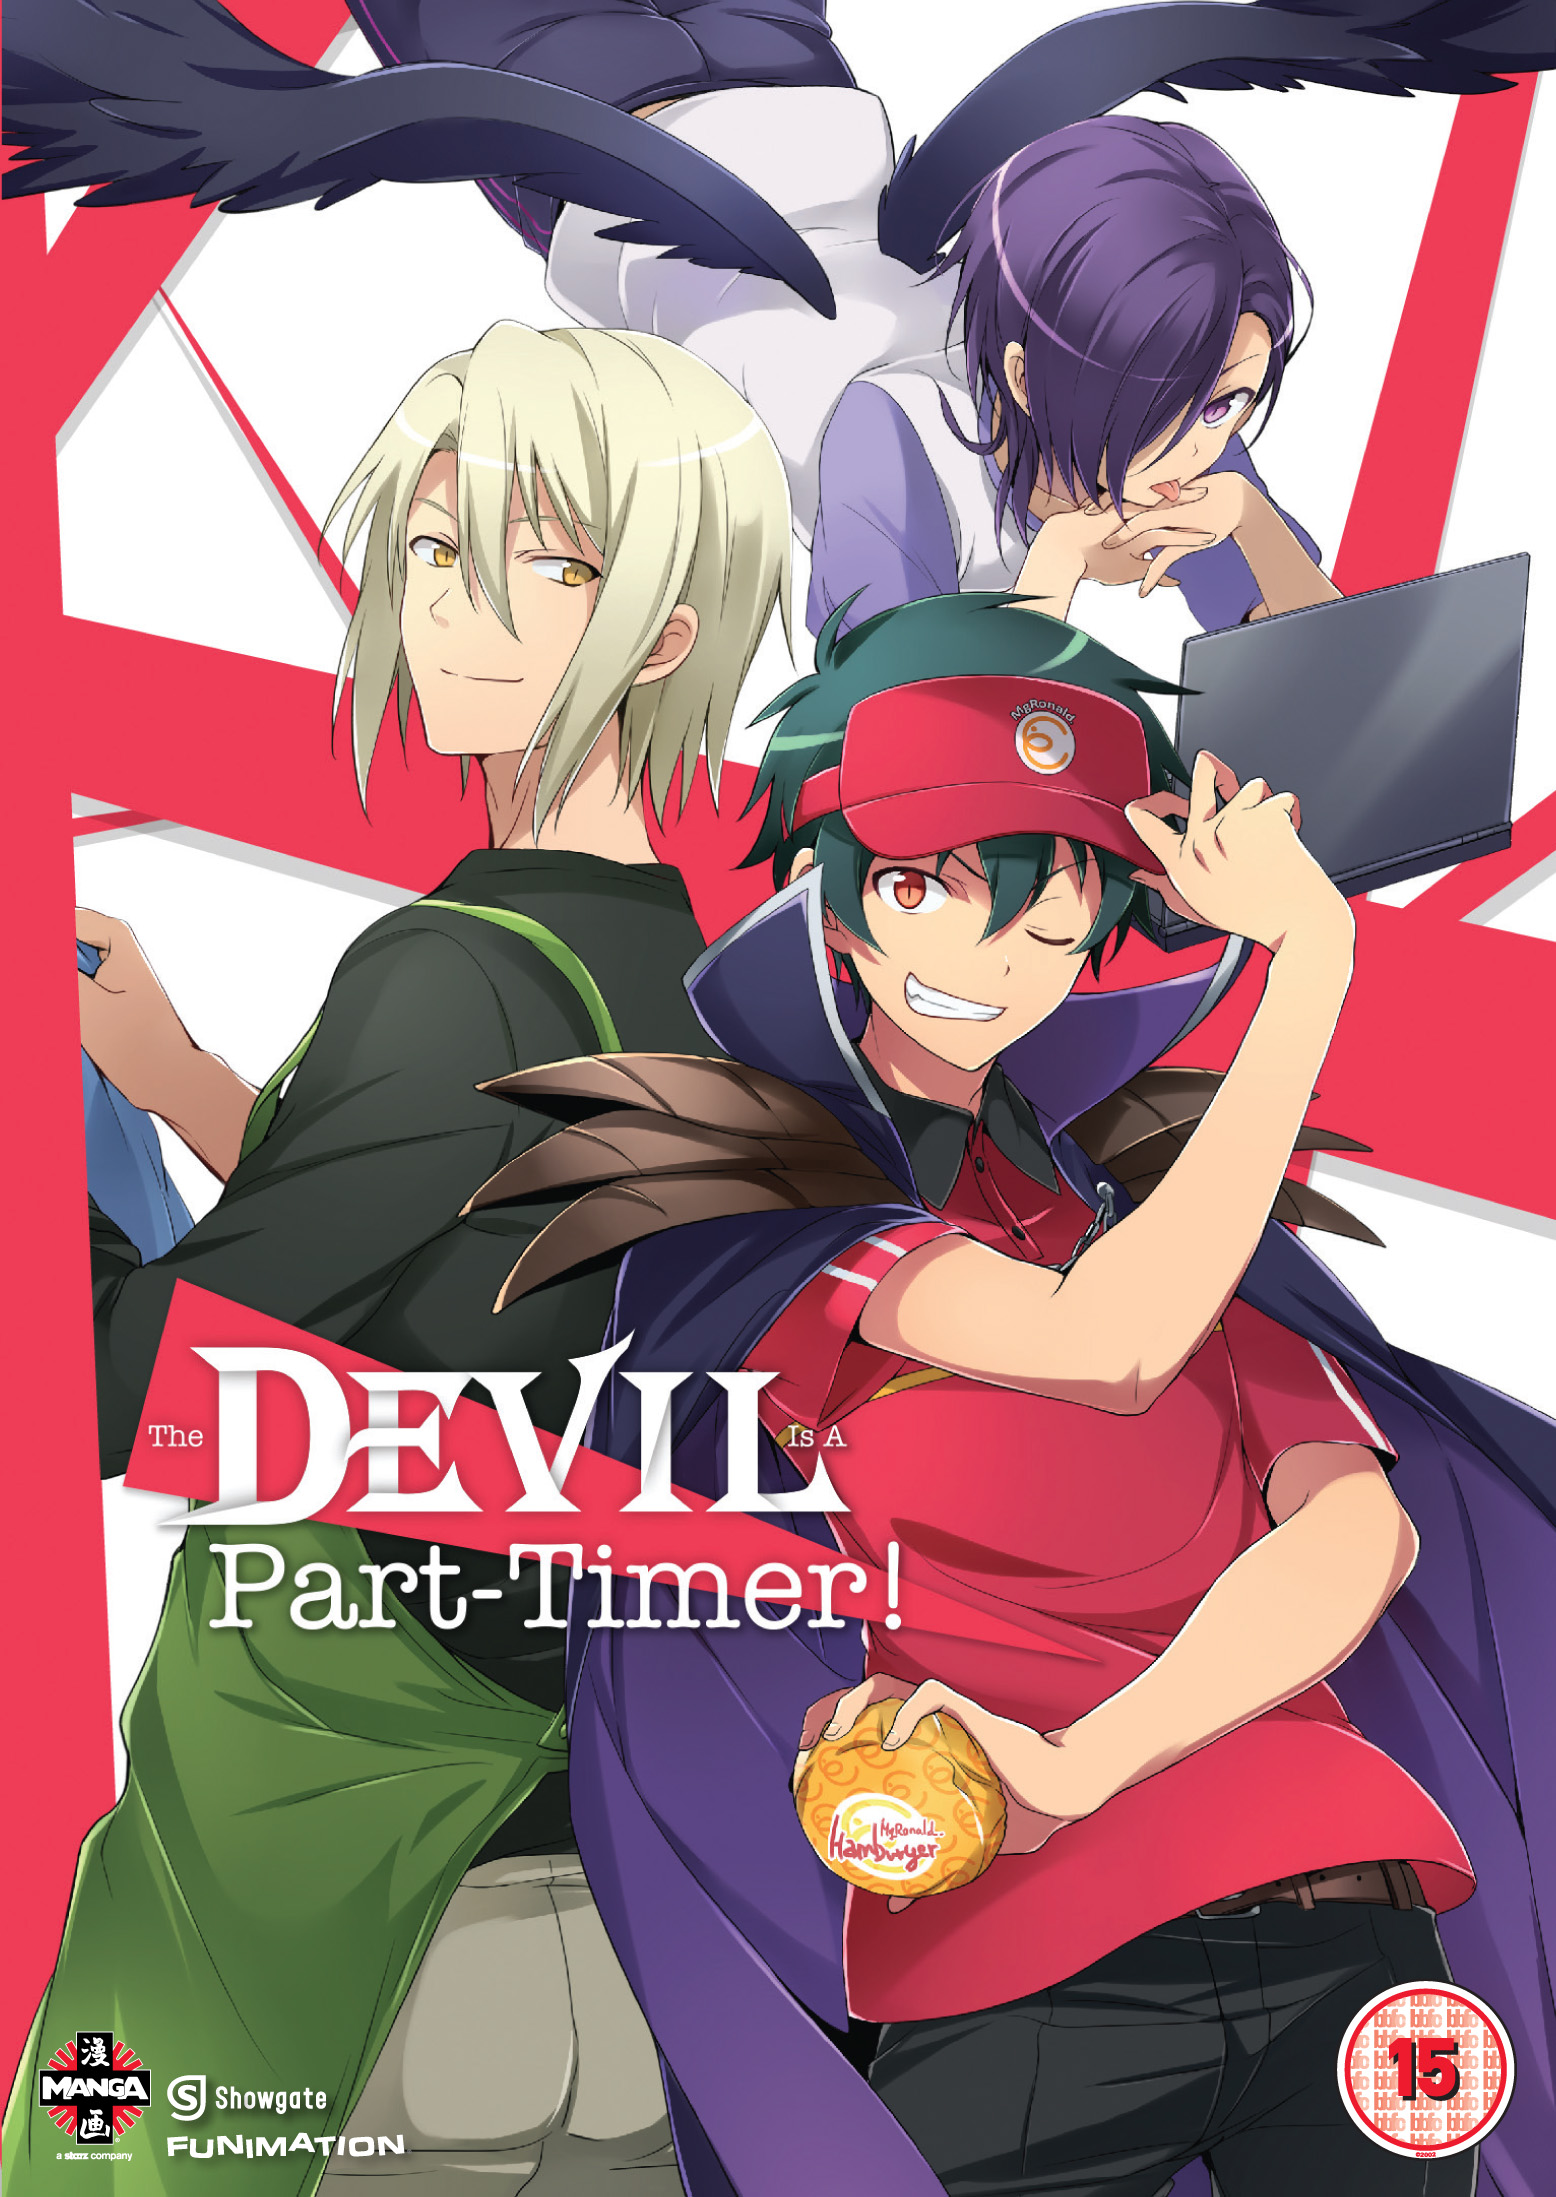 Anime and Manga Reviews: ANIME REVIEW:THE DEVIL IS A PART-TIMER! - Anime Like The Devil Is A Part Timer